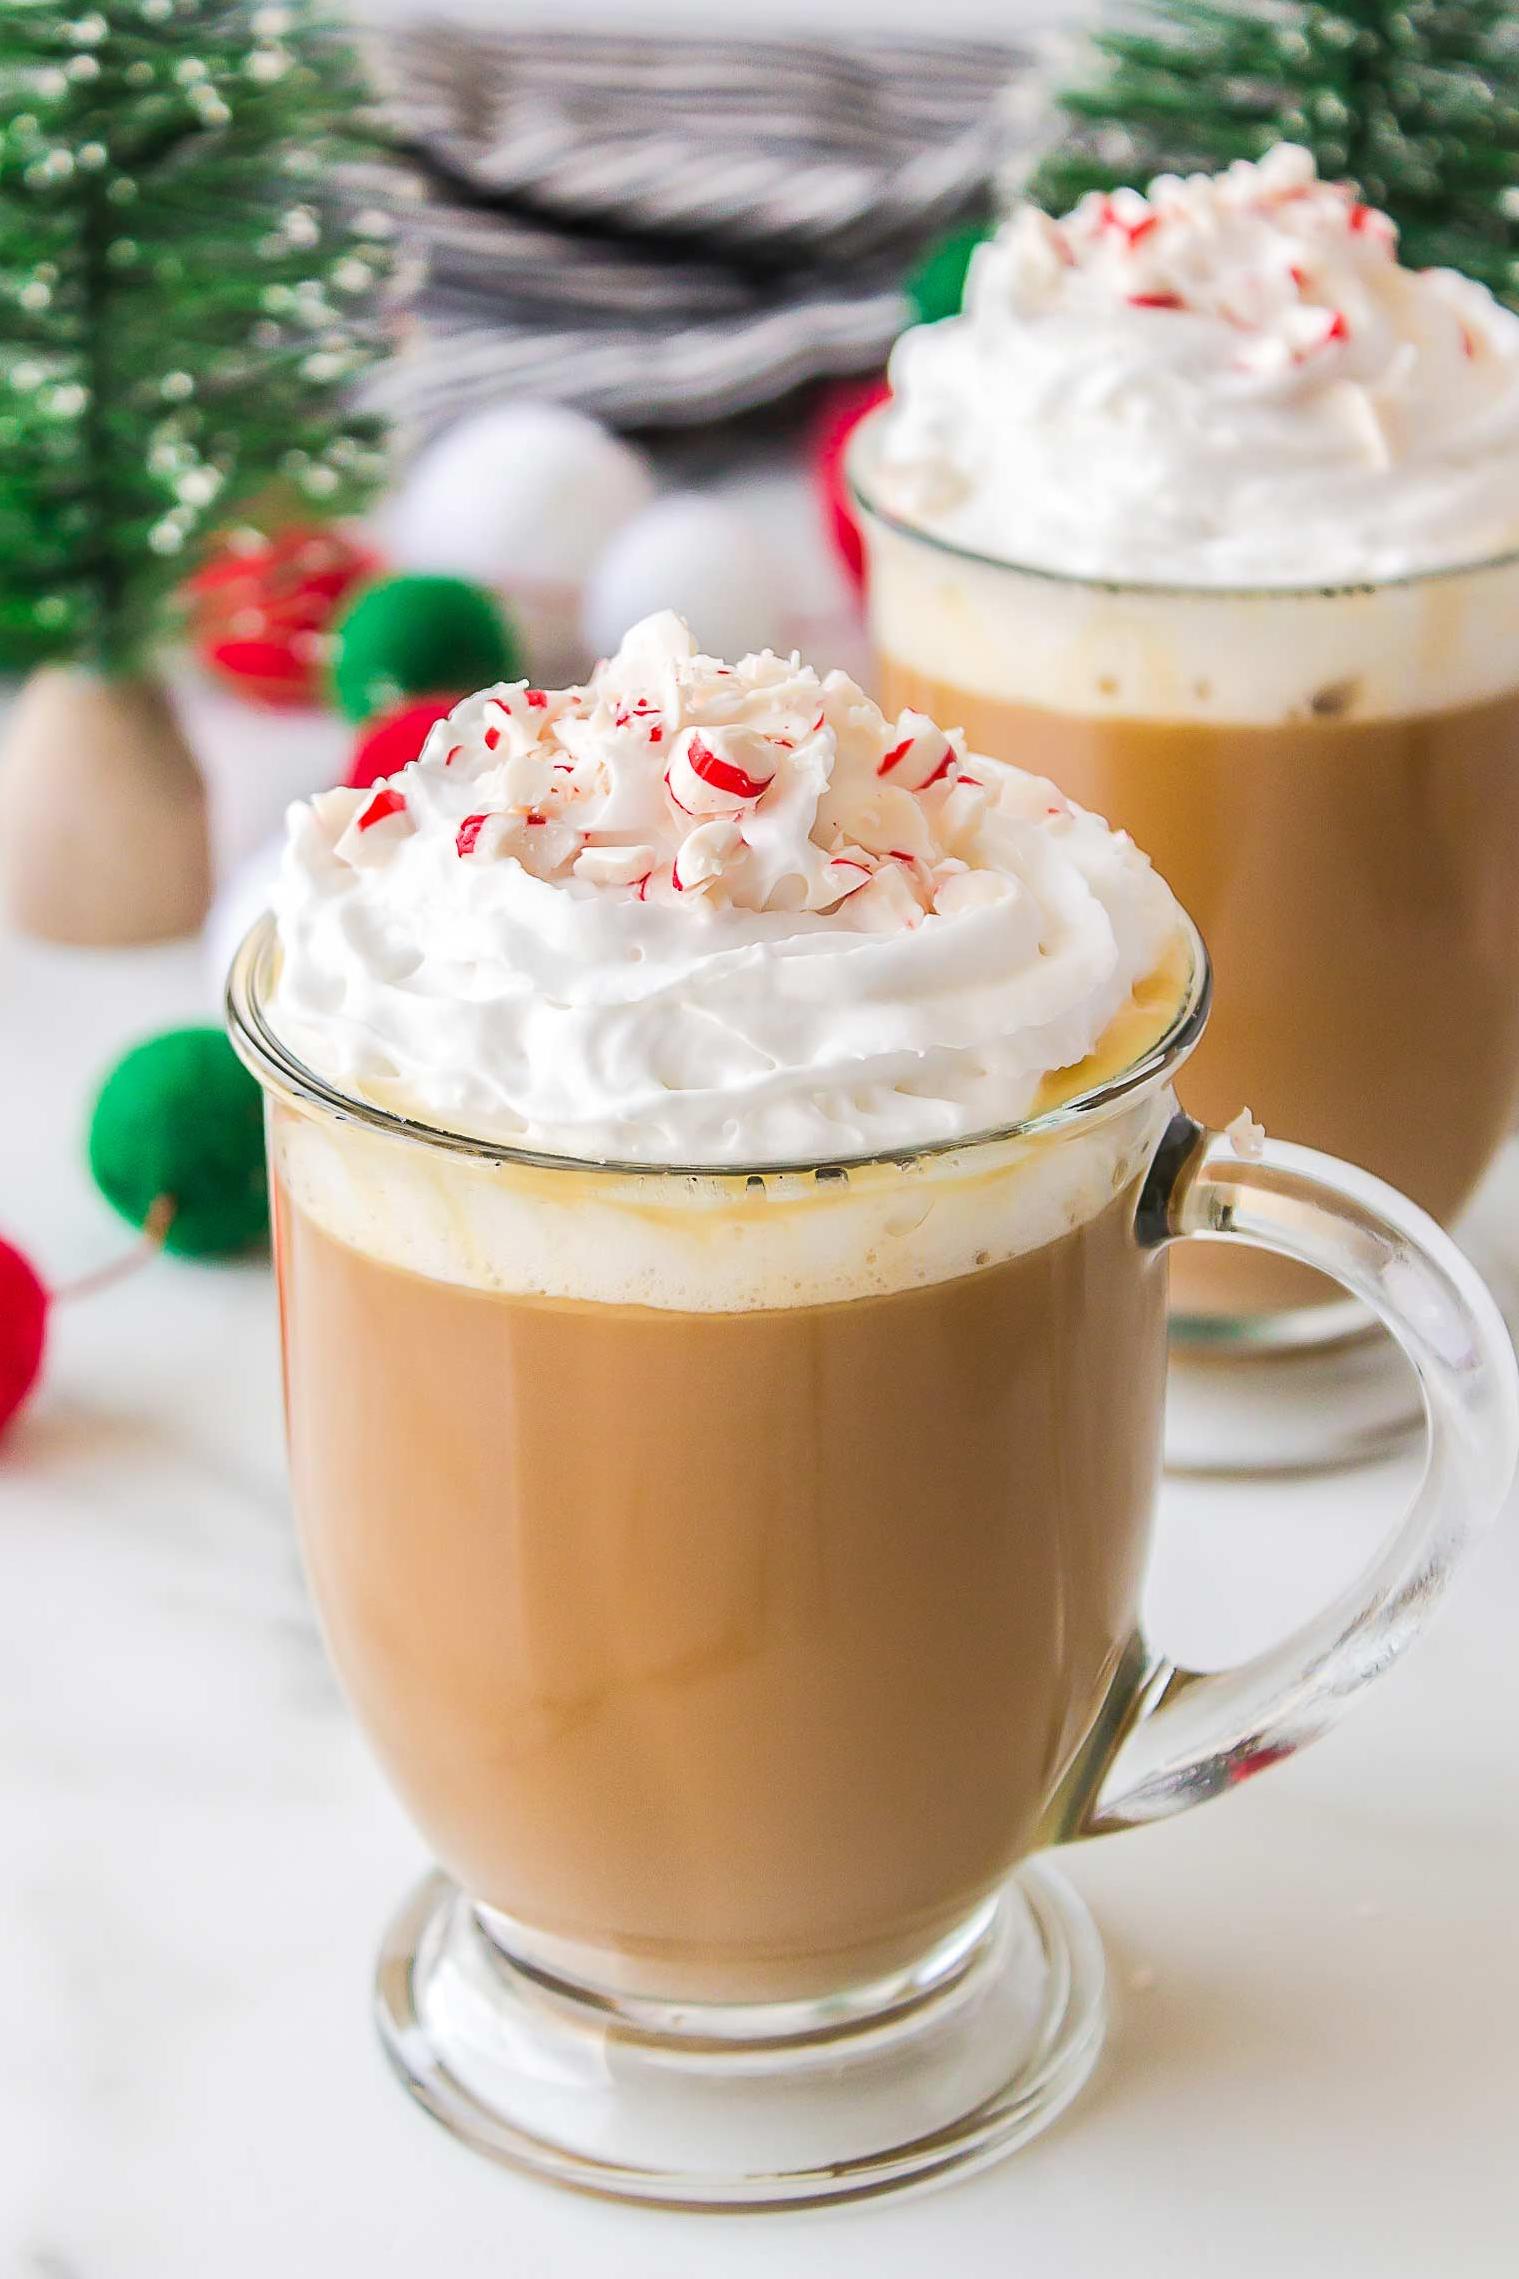  If you love Peppermint White Mocha, you're sure to fall in love with this homemade version